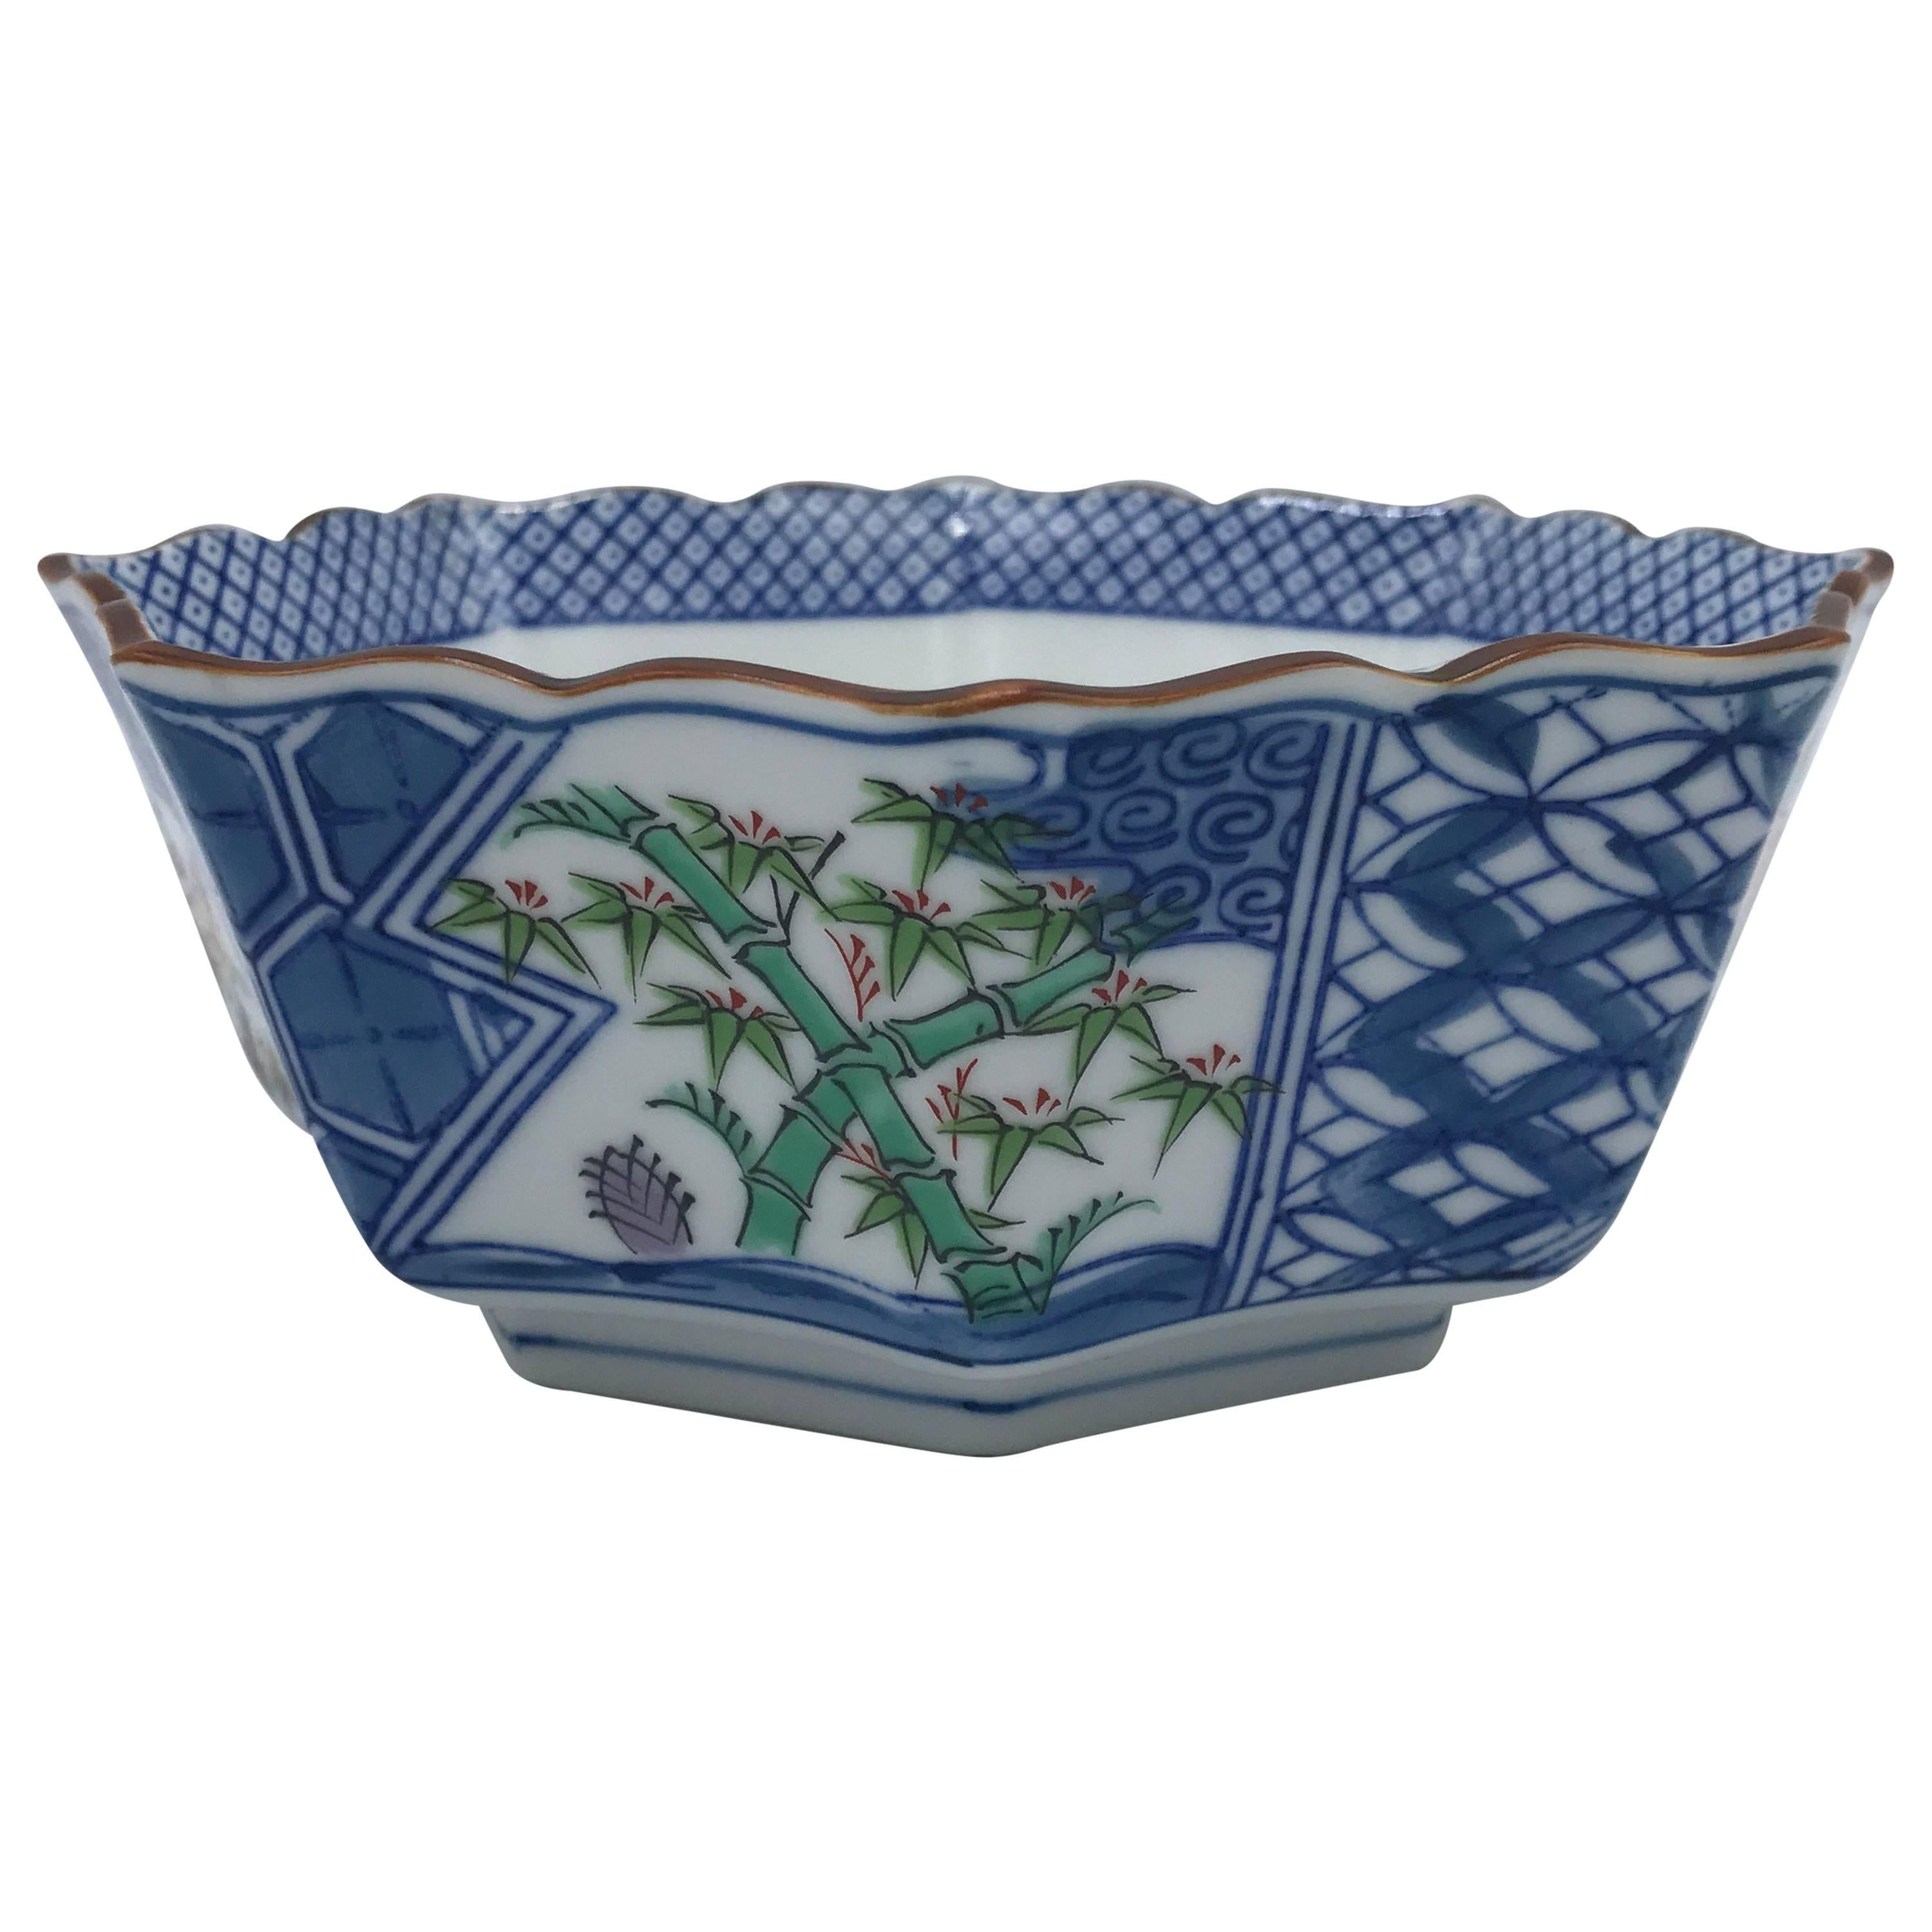 1980s Tiffany & Co. Blue and White Chinoiserie Bowl For Sale